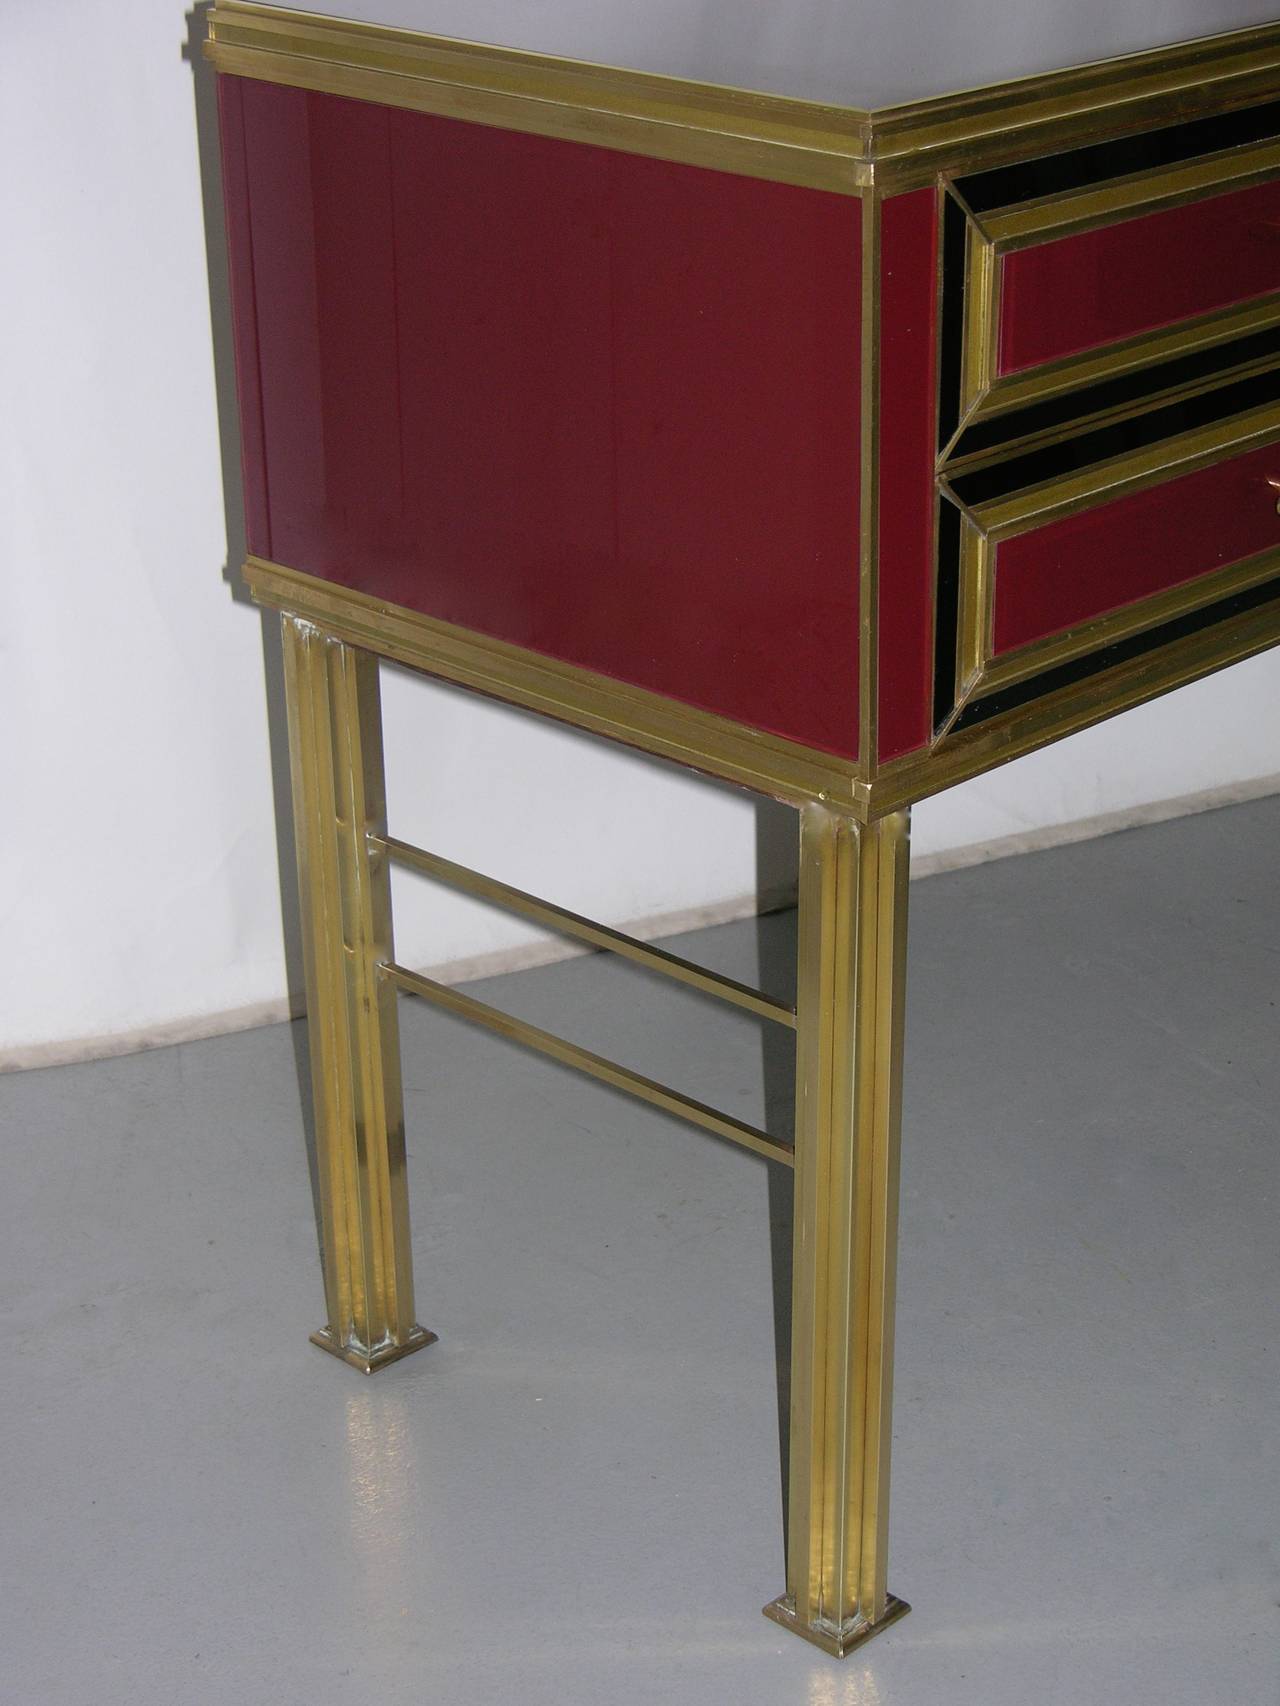 Hand-Crafted One-of-a-Kind Italian Wine Color Glass Sideboard or Console on Bronze Legs